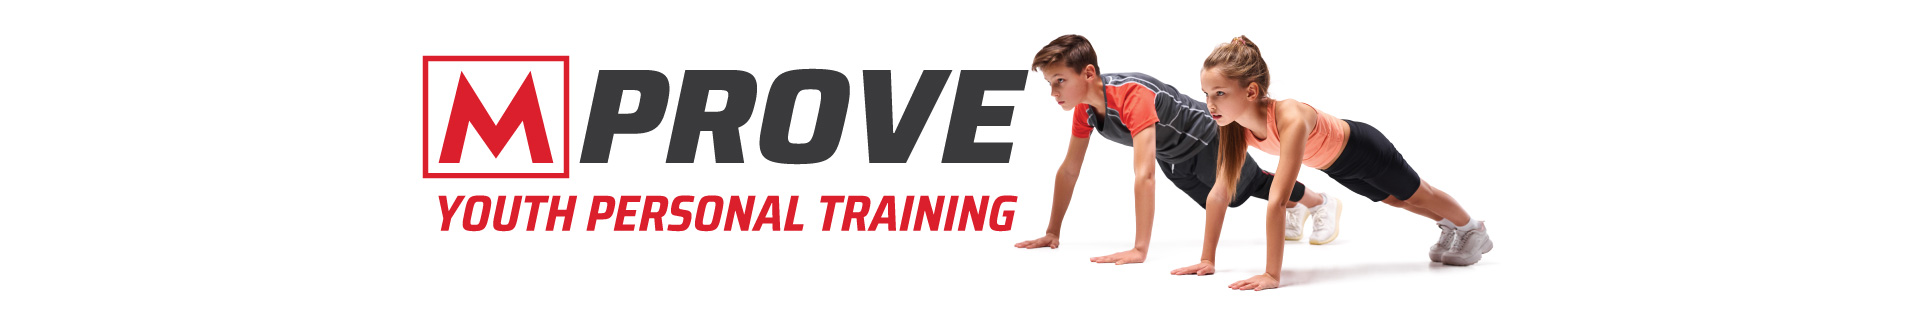 Youth Personal Training